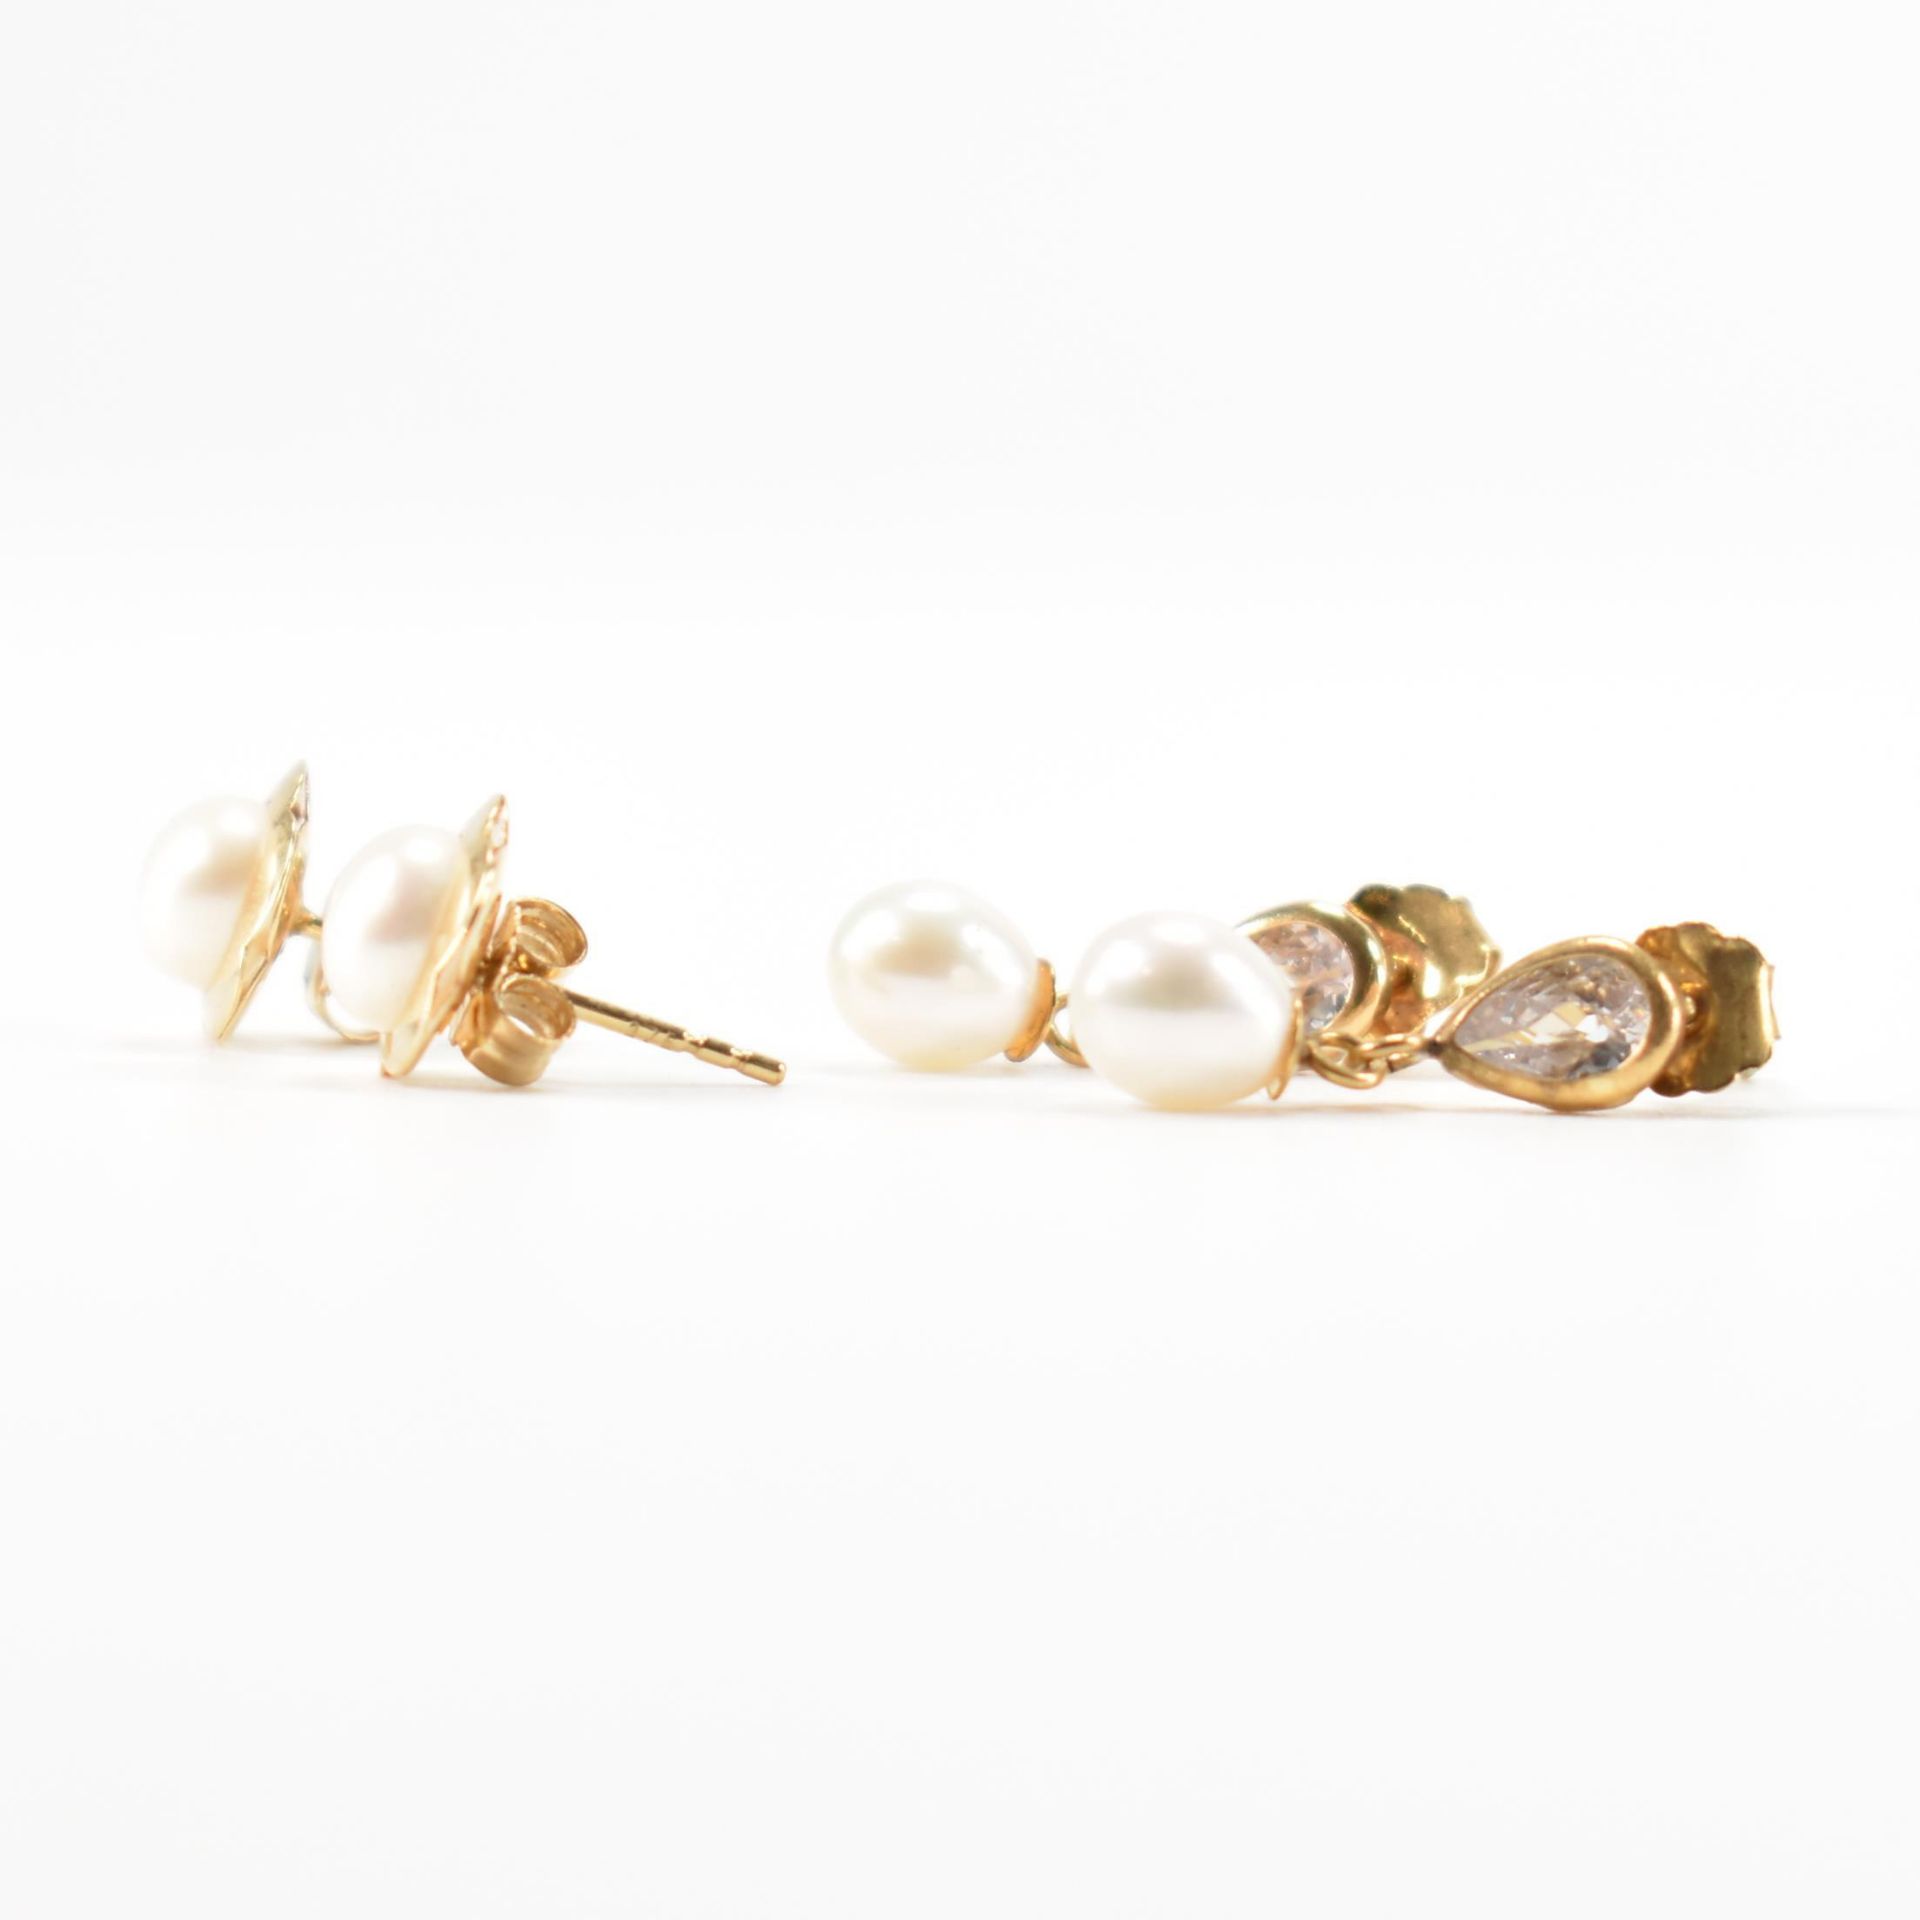 TWO PAIRS 9CT GOLD & CULTURED PEARL EARRINGS - Image 3 of 3